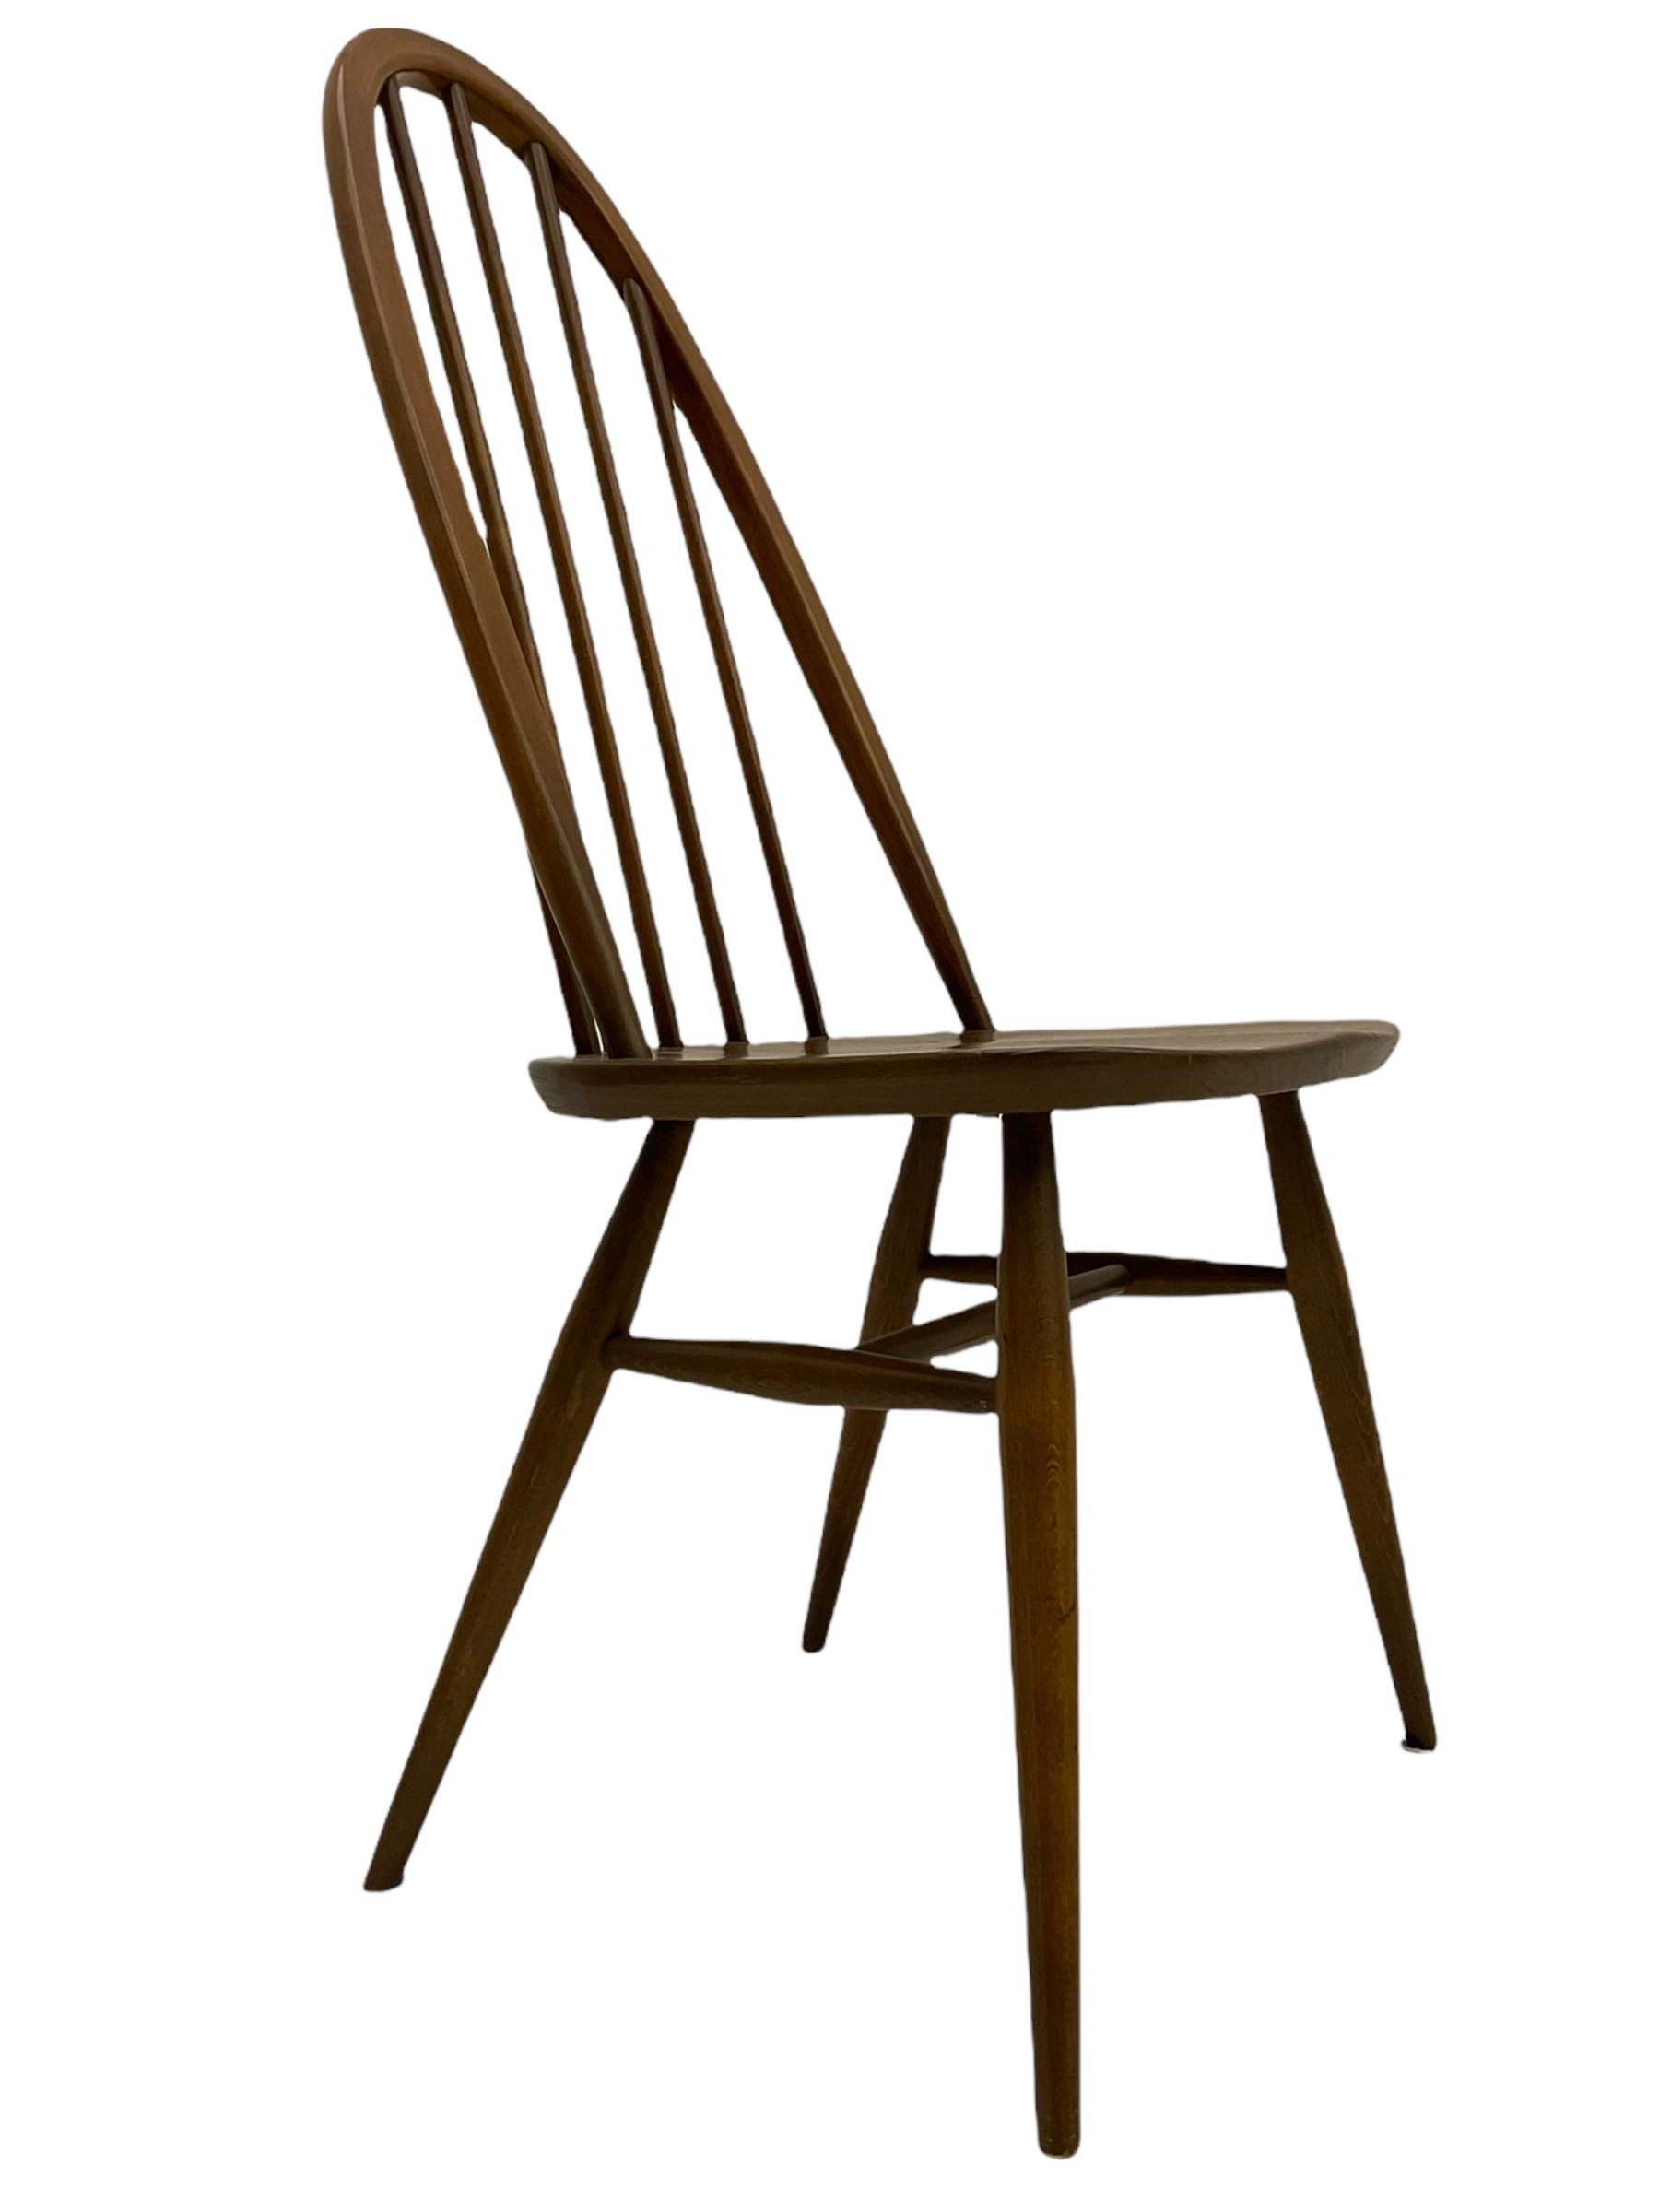 Four Ercol medium elm and beech chairs - Image 6 of 8